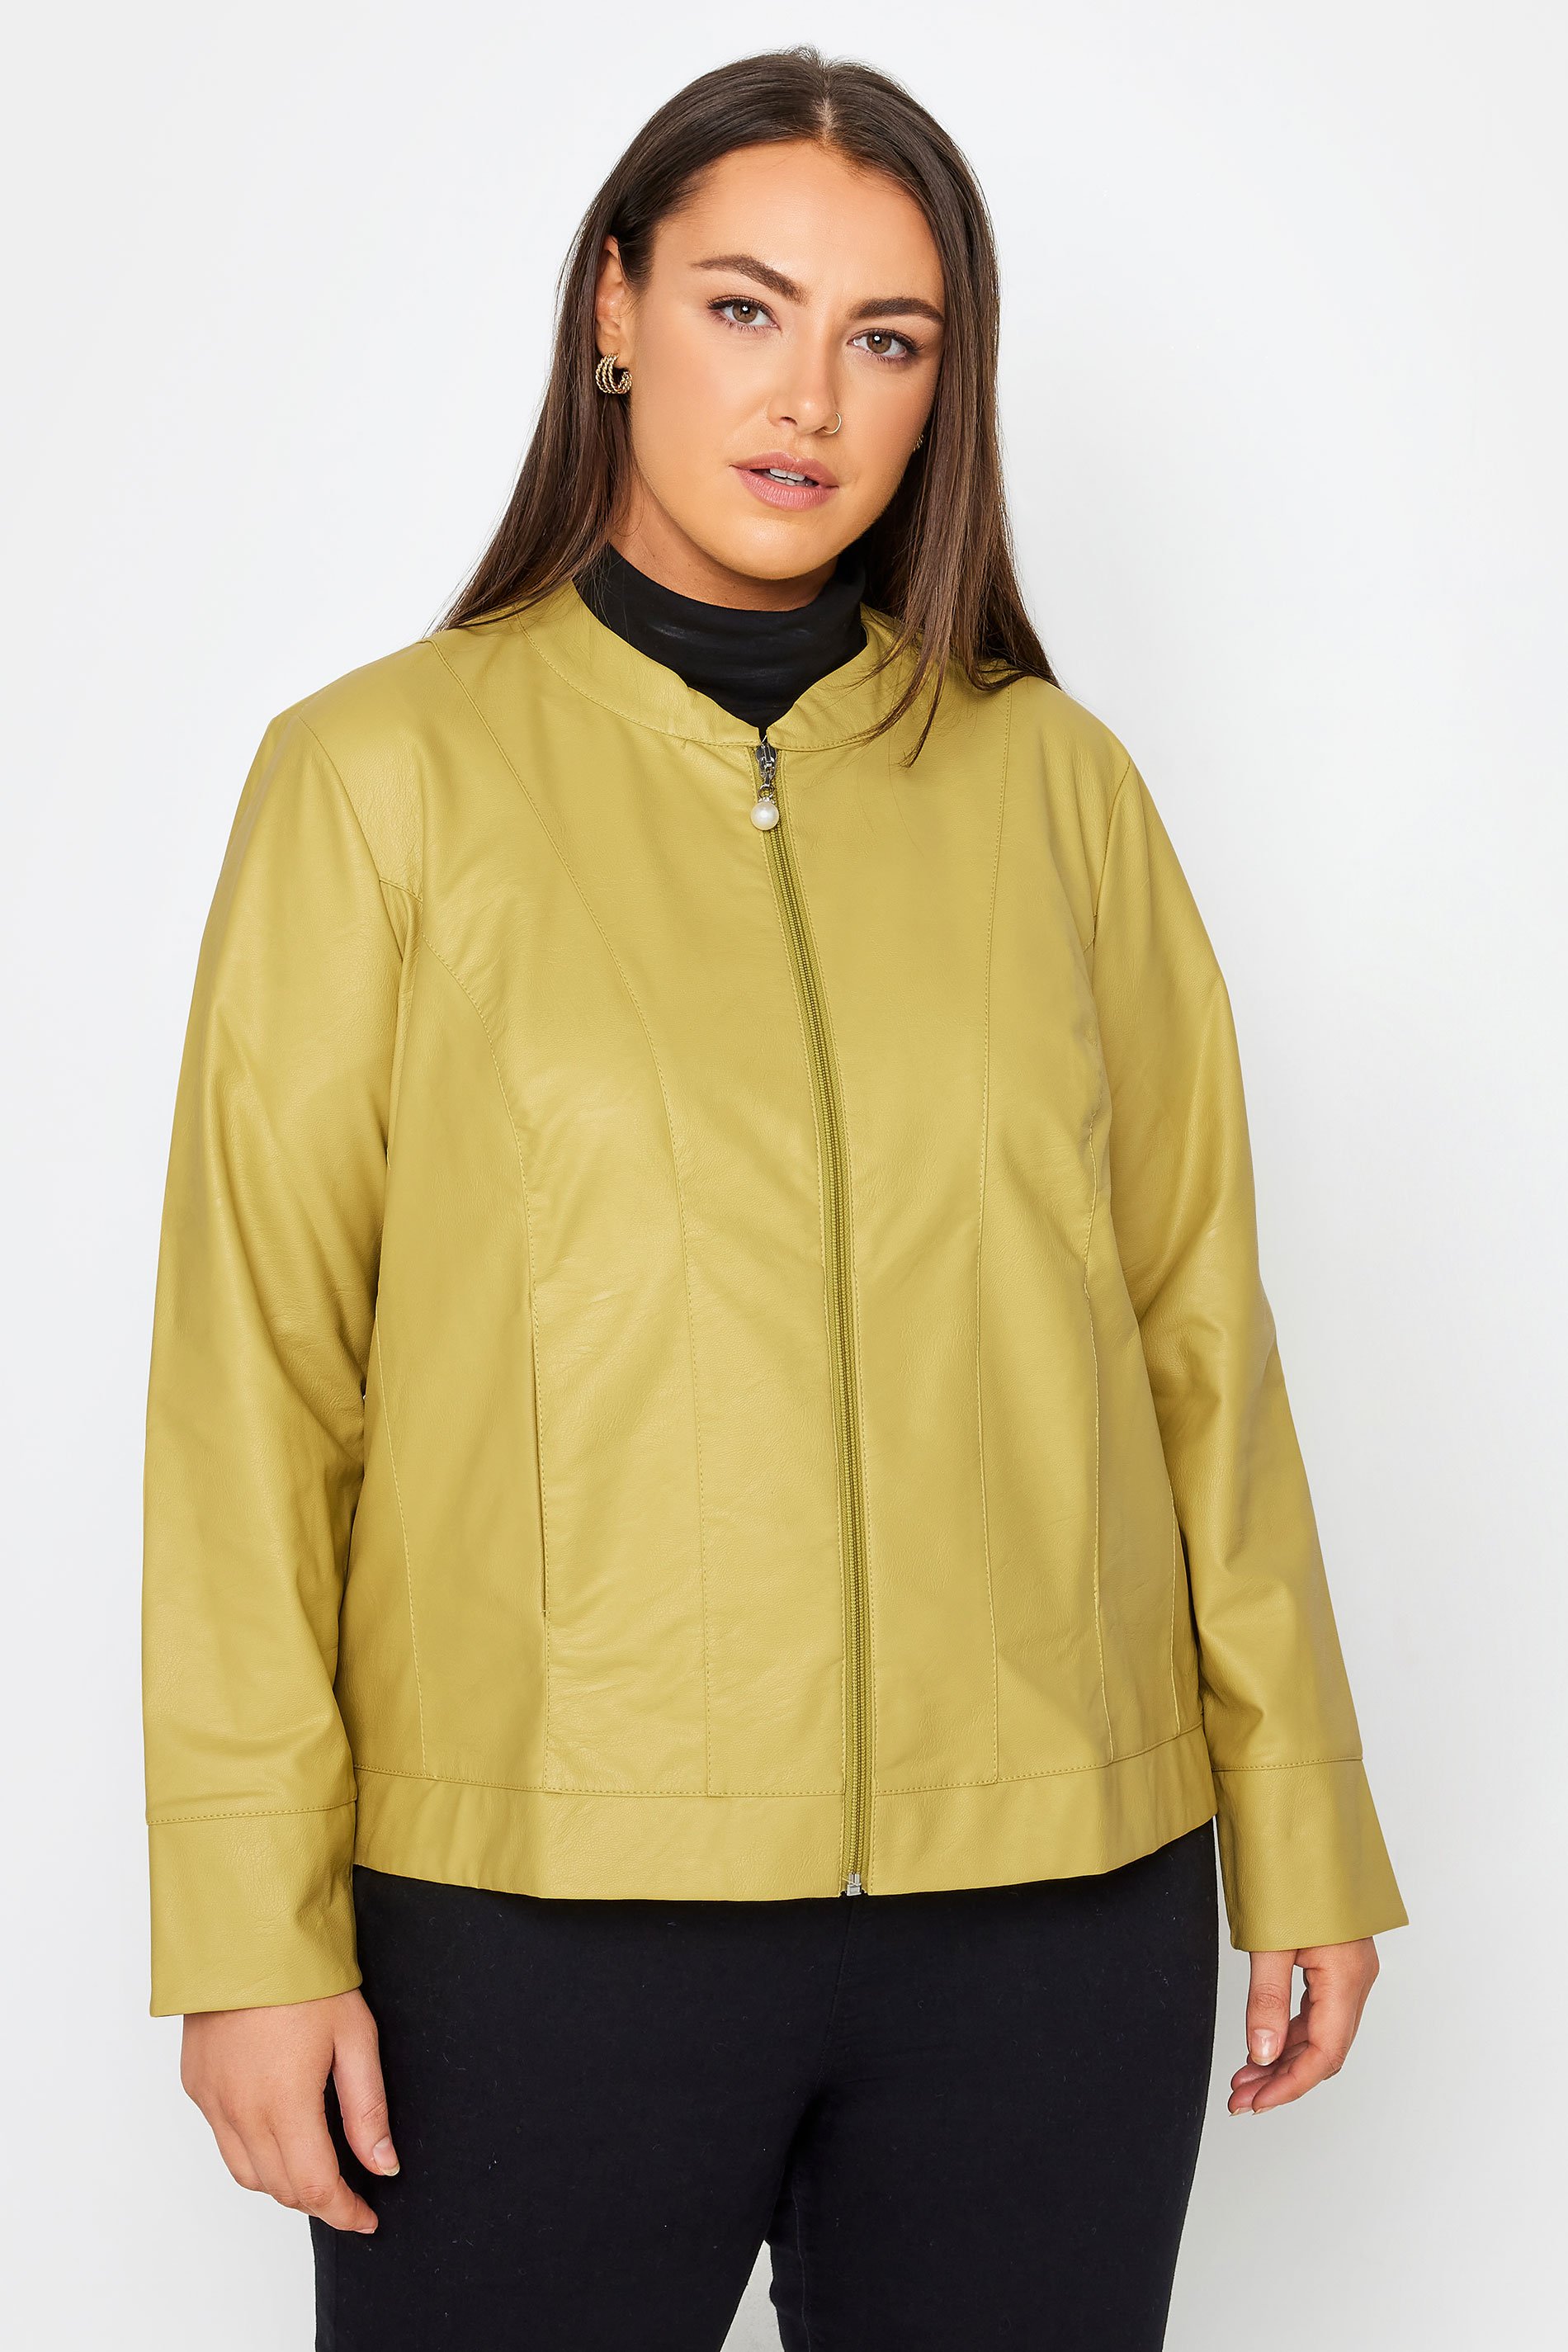 Evans Mustard Yellow Faux Leather Collarless Jacket 1